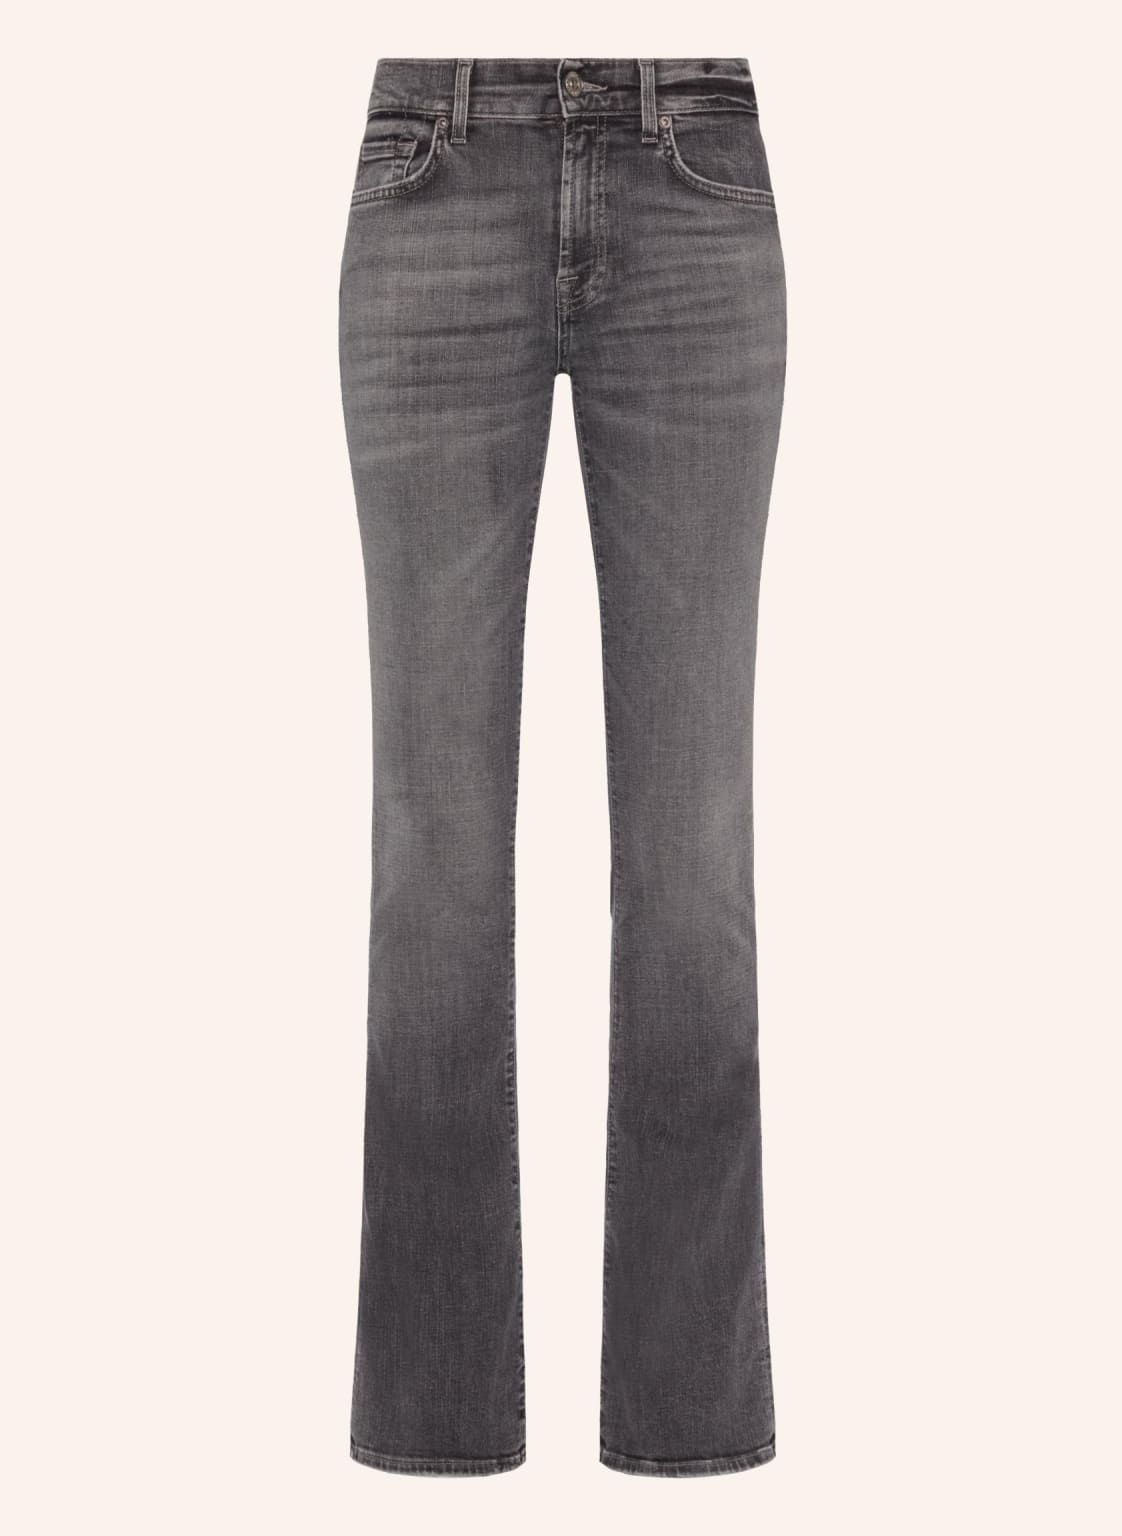 7 For All Mankind Jeans Bootcut Bootcut Fit grau von 7 For All Mankind